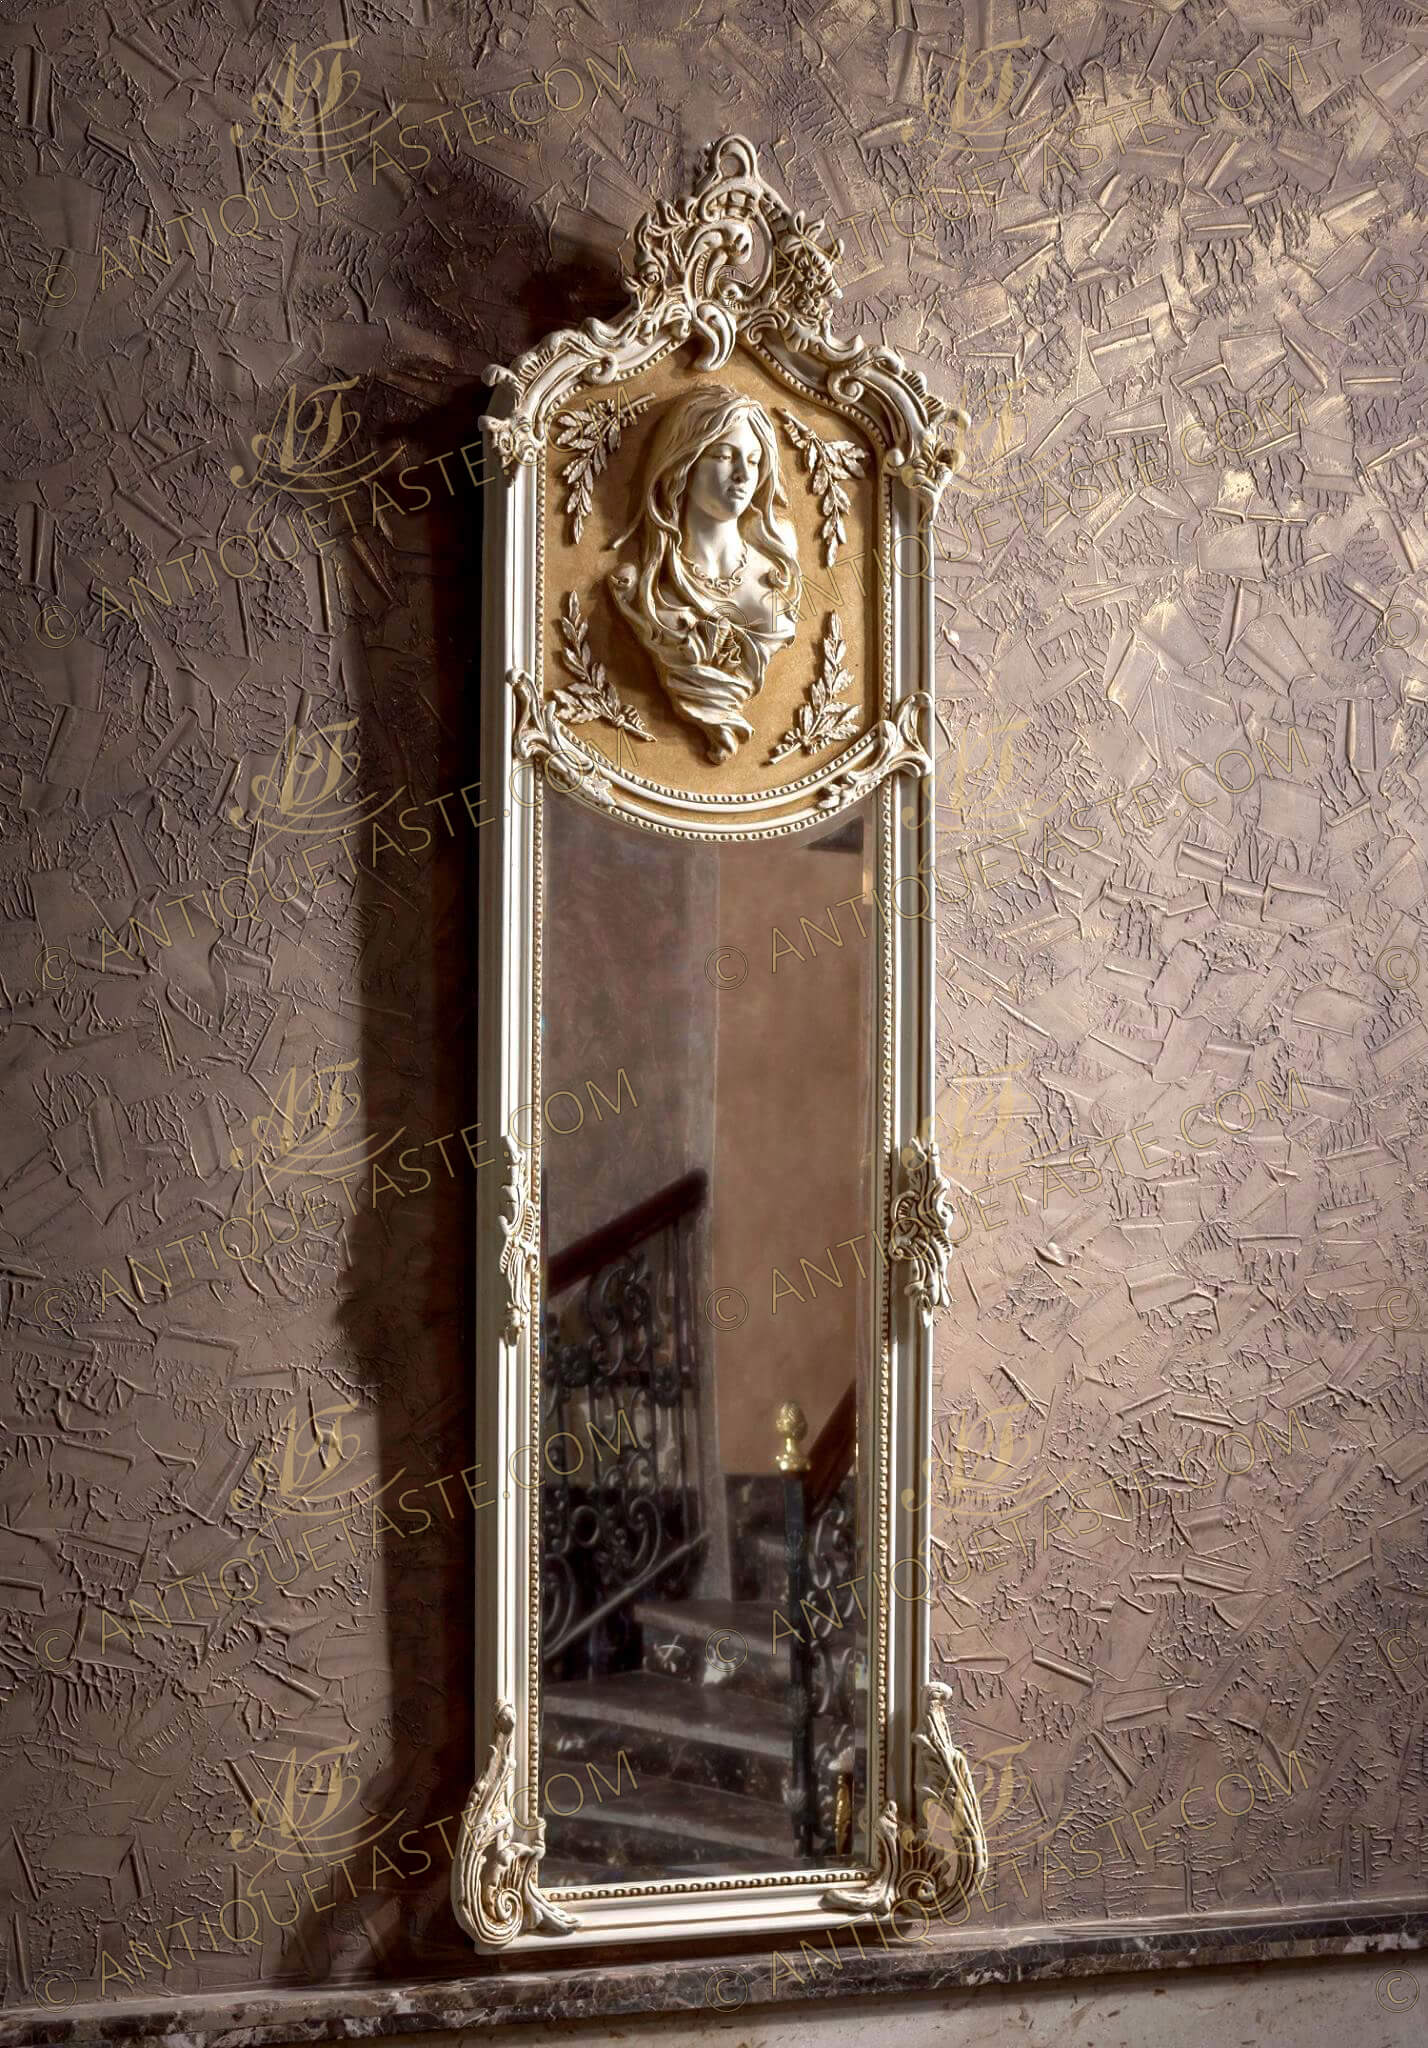 Sumptuous and Sensational large Louis XV Rococo style Pier Grand Pillar Mirror, hand carved with Rococo and Rocaille elements, painted in blanc de plomb finish and patinated, The mirror is available as well in full gilding with French gold foils 18th carat with patina and other style of ornate carvings applied on the top panel, center and bottom as displayed, The top is crested with rocaille scrolled acanthus blossoming motifs surmounting a main figure of delicate gesso female figure hand carved in extreme beauty, surrounded with olive branches, with a background finished in an elegant beige color, surrounded with pearl border, The large beveled mirror plate inset a concave moulded frame ornate with rococo moldings and internal pearls border, terminating with C scrolled pierced acanthus leaves on shell on each corner.